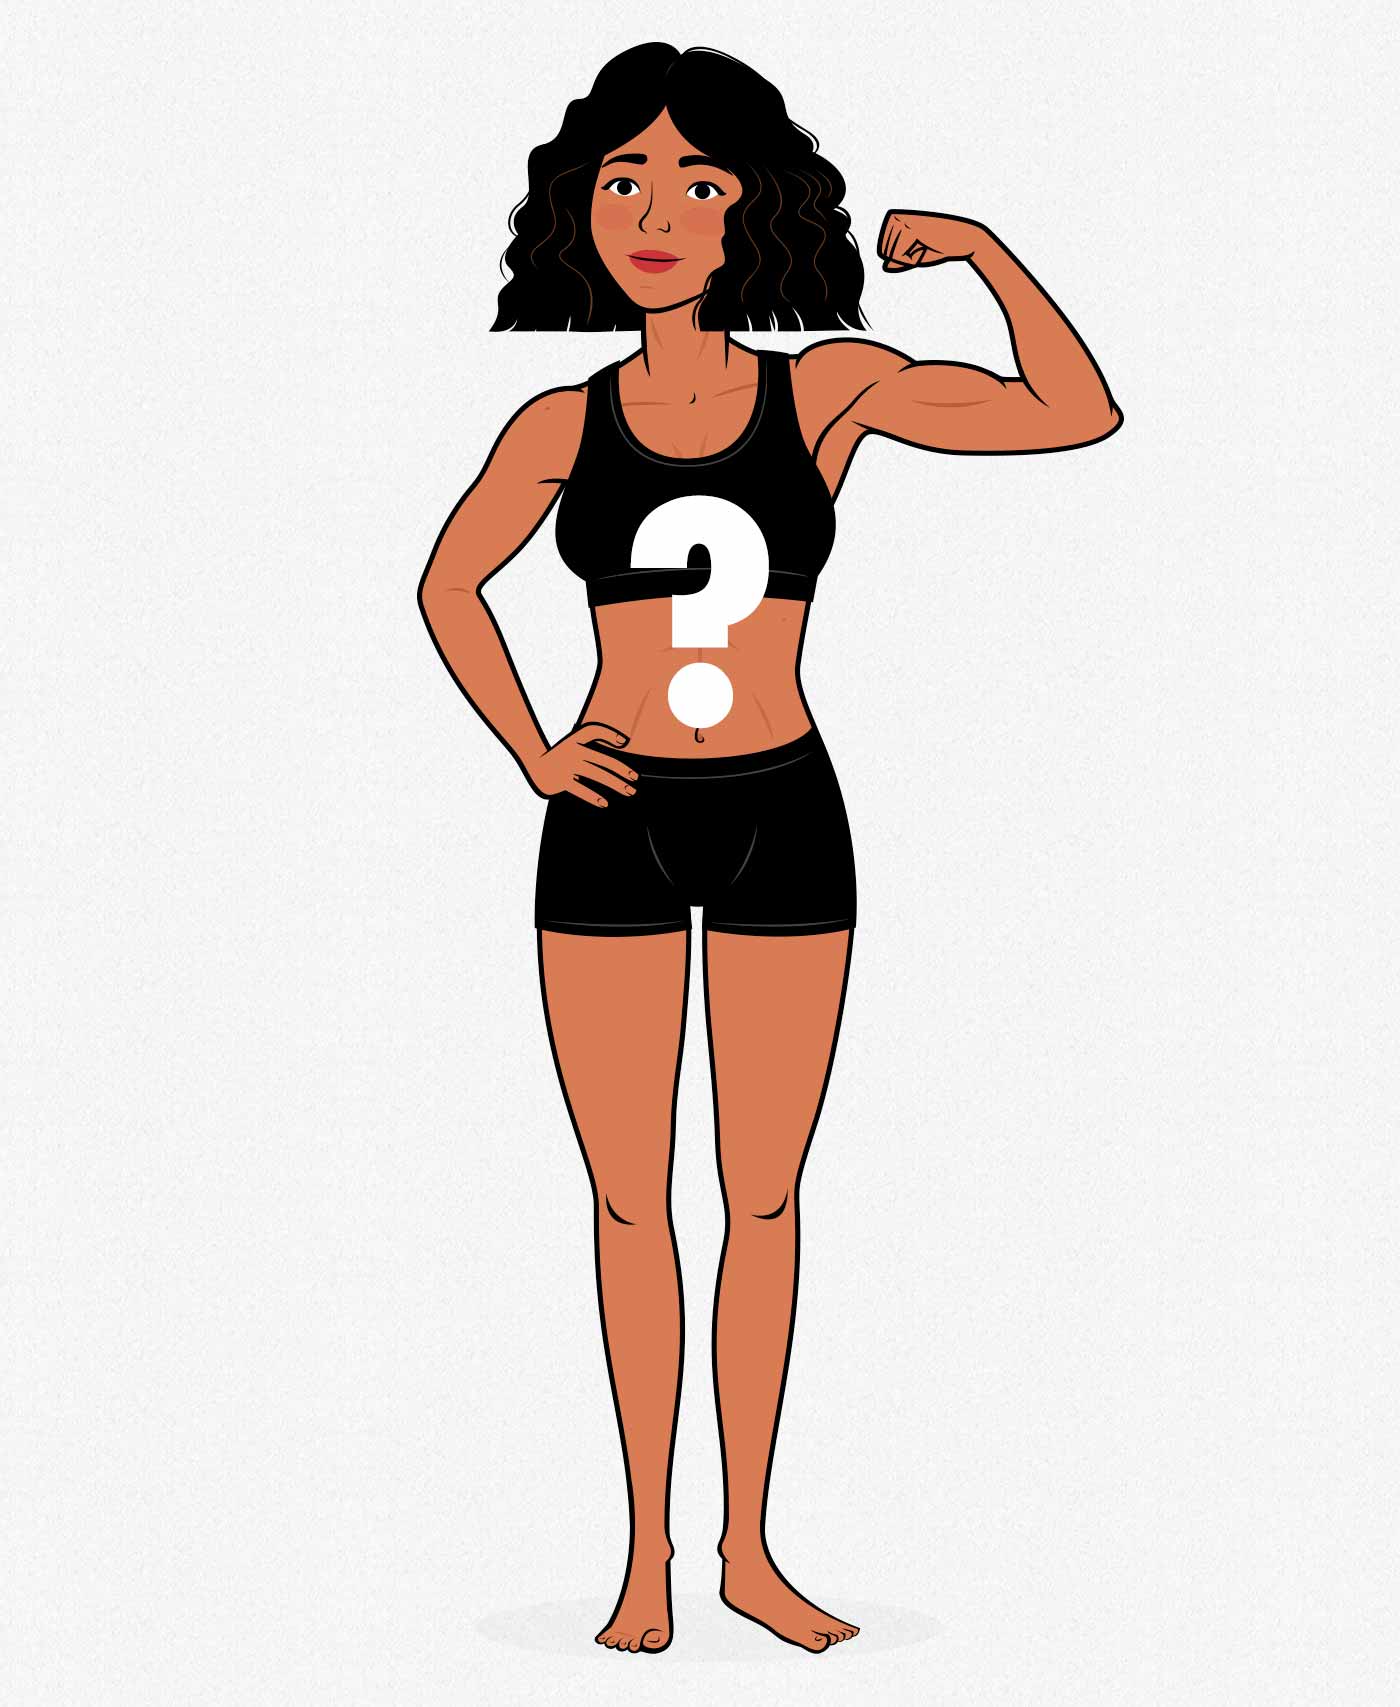 Illustration of an athletic woman flexing her biceps.